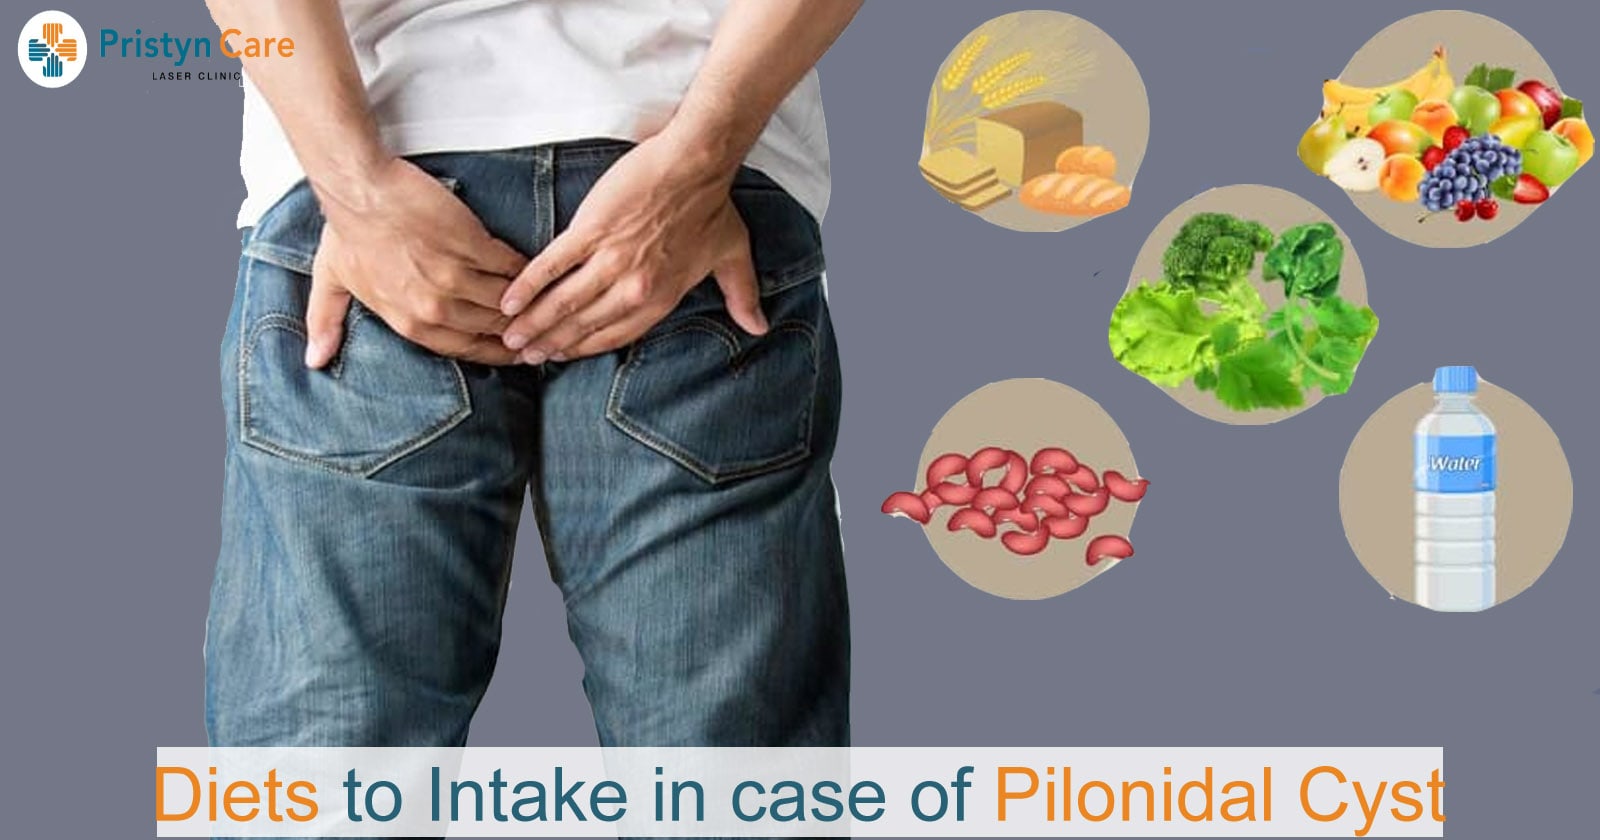 https://www.pristyncare.com/blog/wp-content/uploads/2019/08/diets-to-intake-in-case-of-pilonidal-cyst-min.jpg